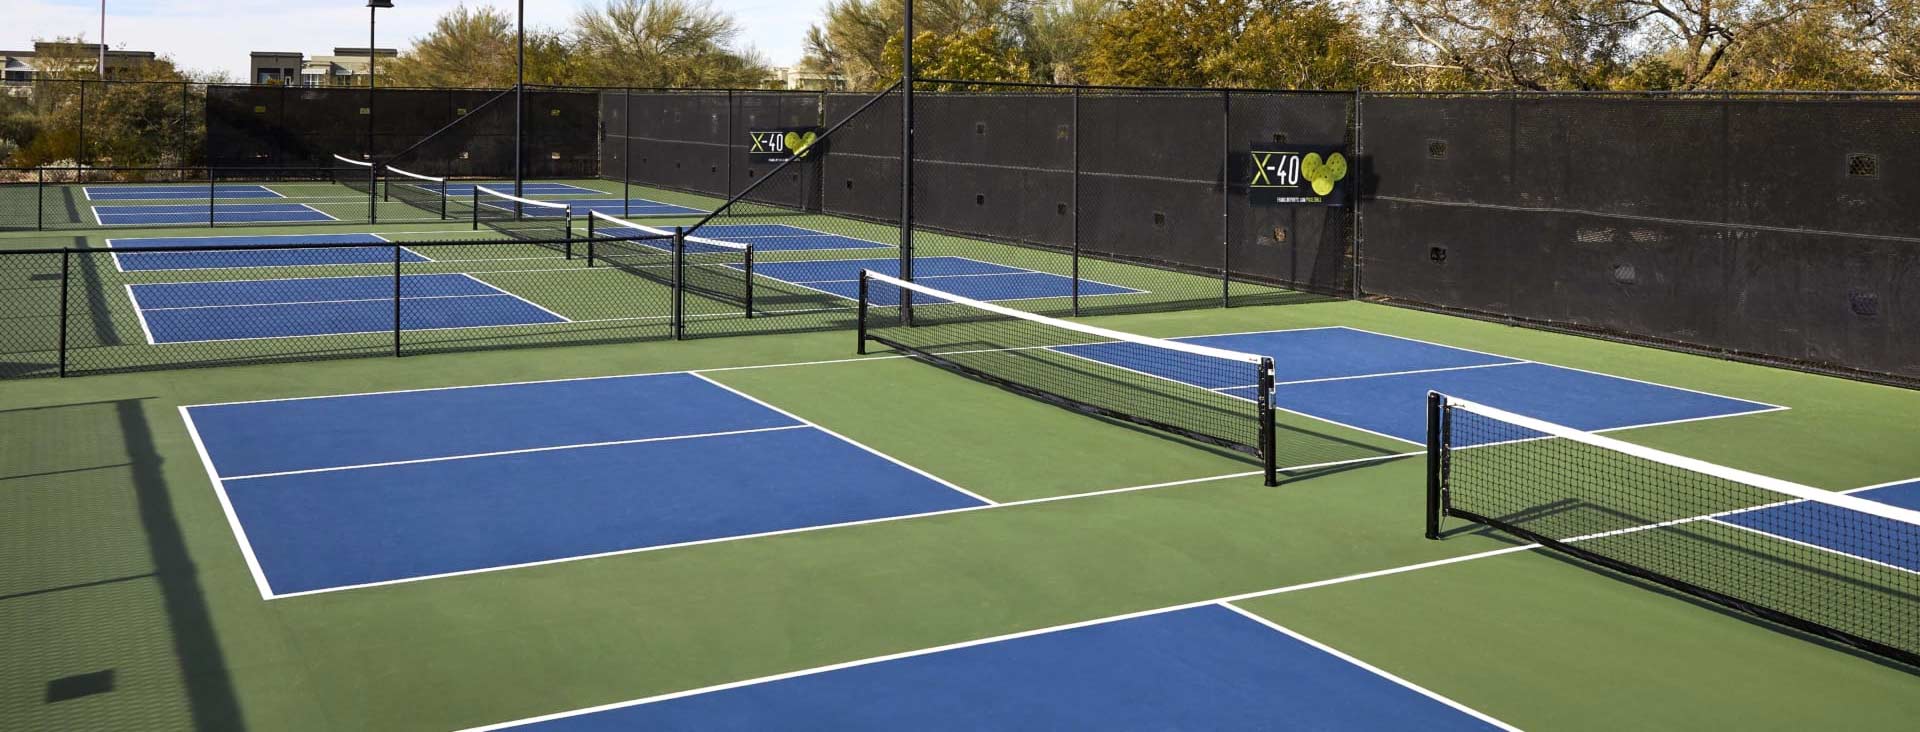 Can You Use a Tennis Court to Play Pickleball?  